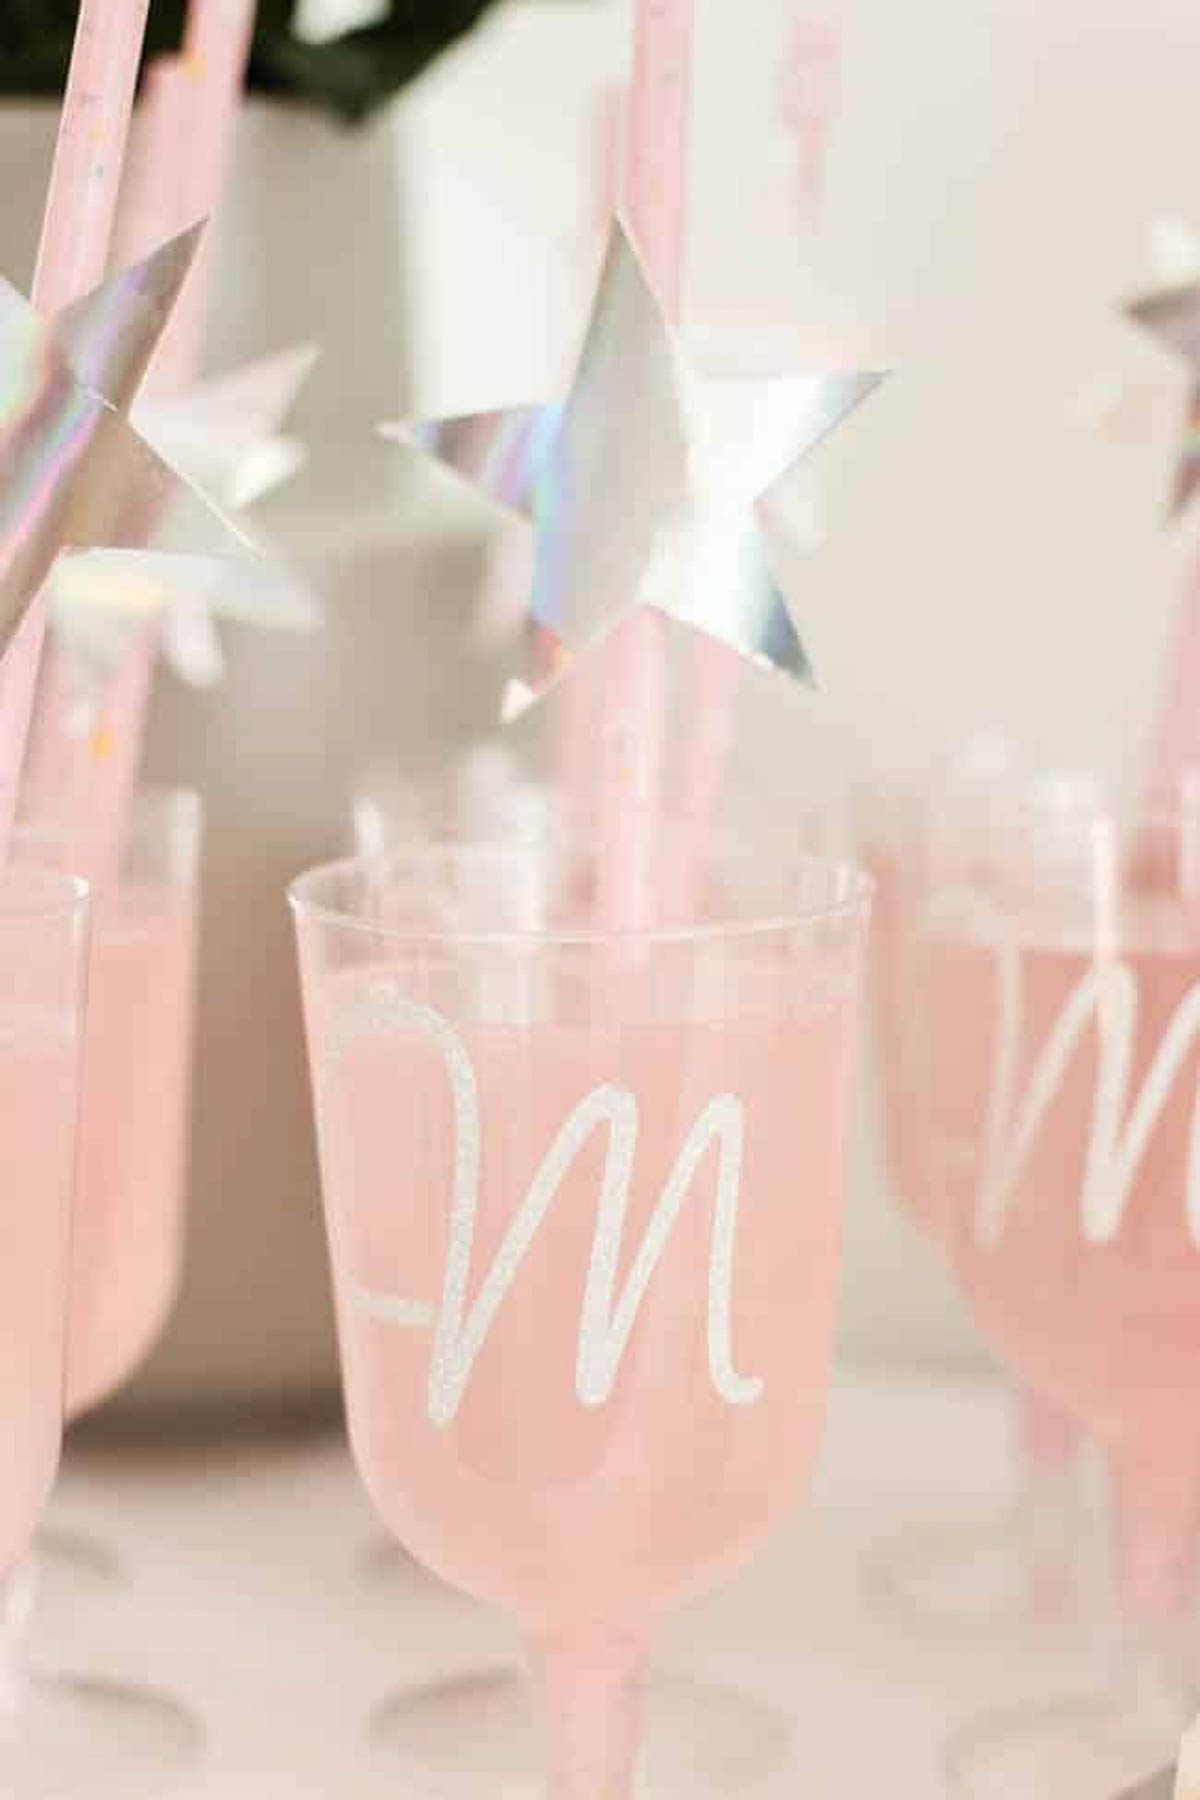 Monogramed cups for a bridal shower